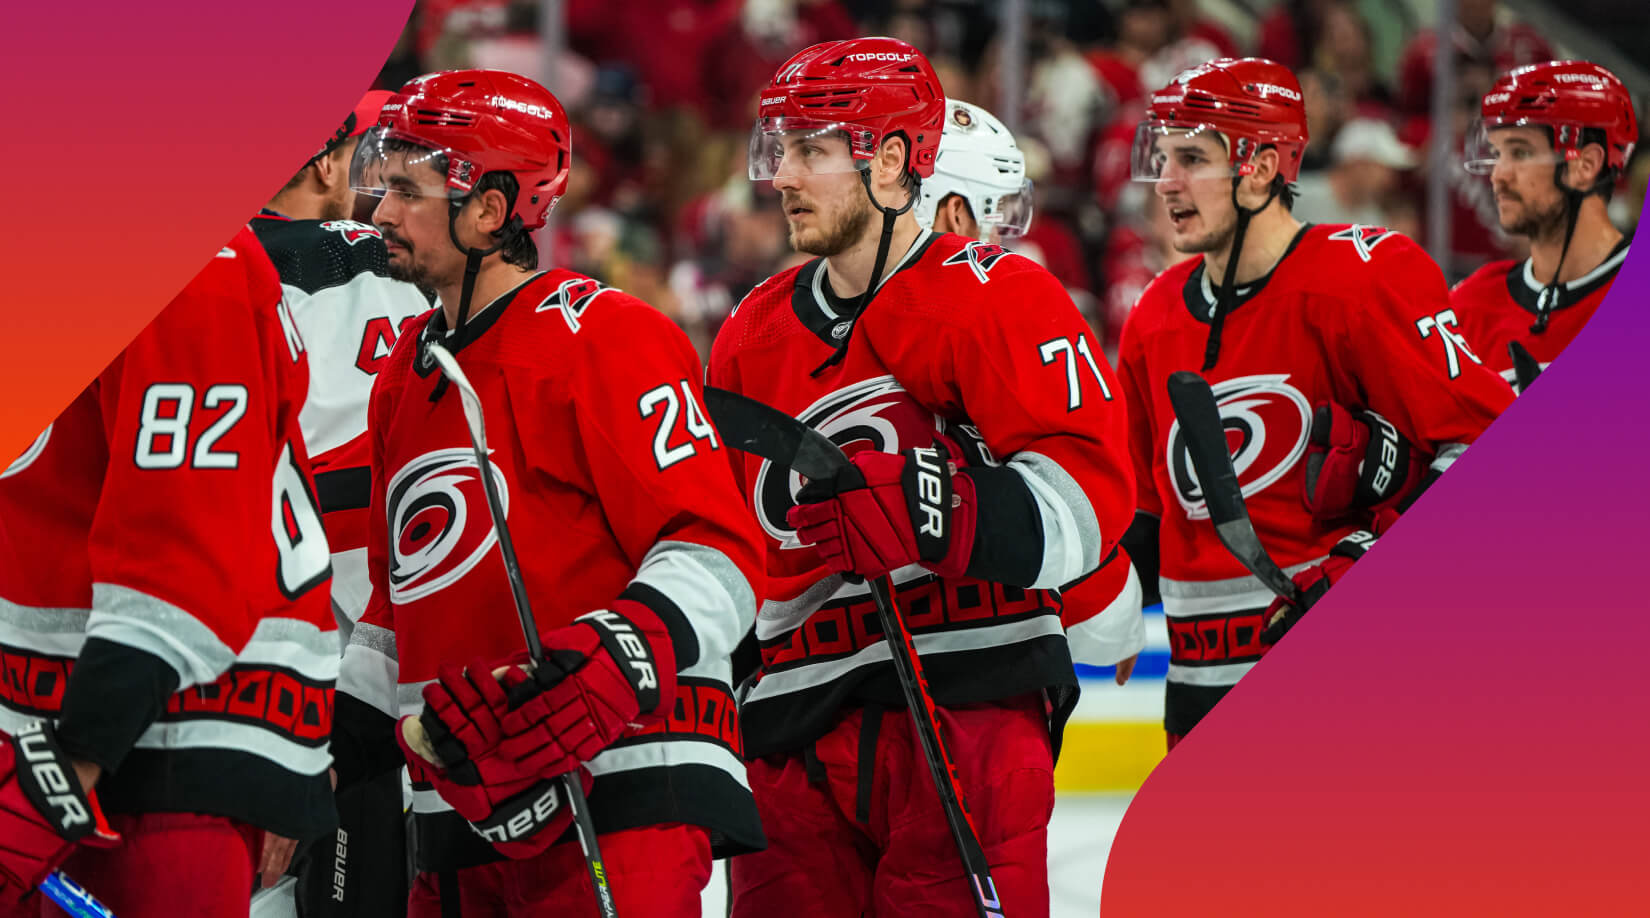 The Carolina Hurricanes Should Be Feared Heading Into the Playoffs